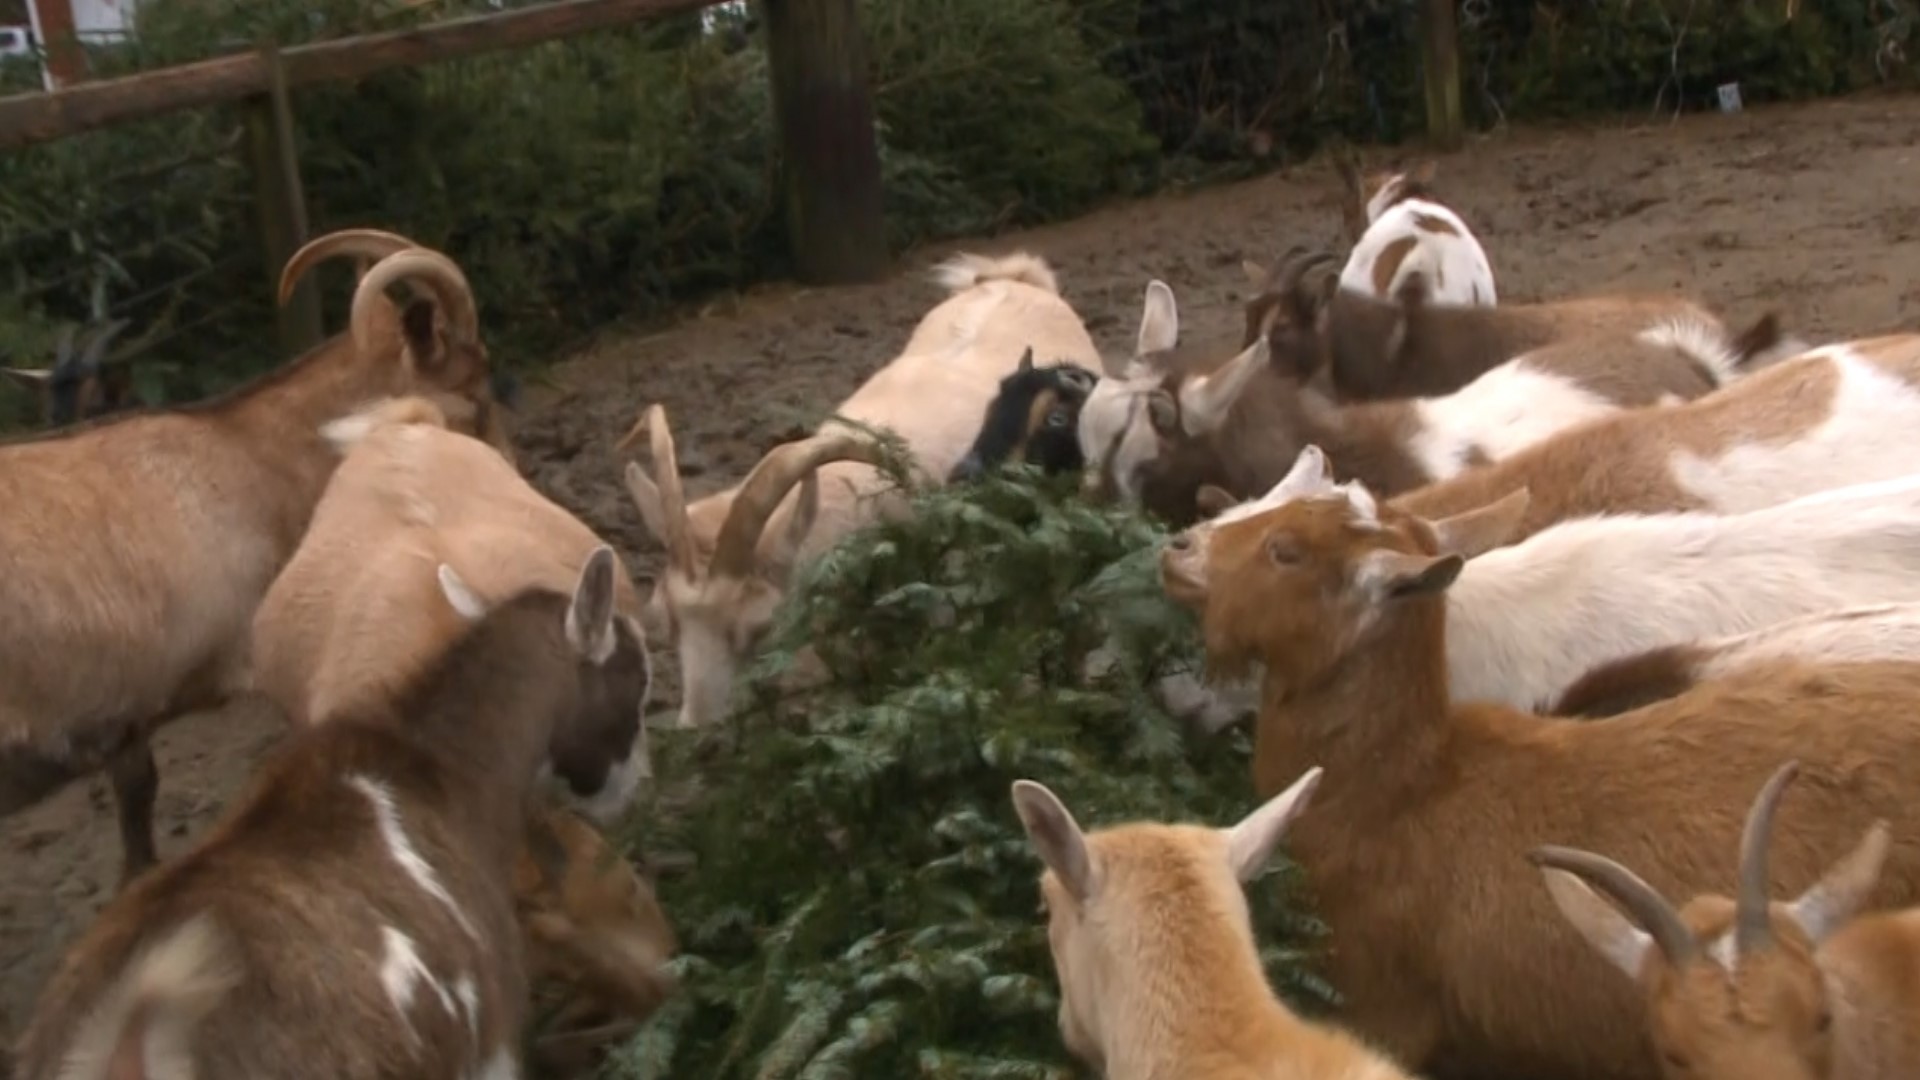 The holiday season may be over, but for the animals at Aussakita Acres Farm in Manchester, it's the most wonderful time of the year.